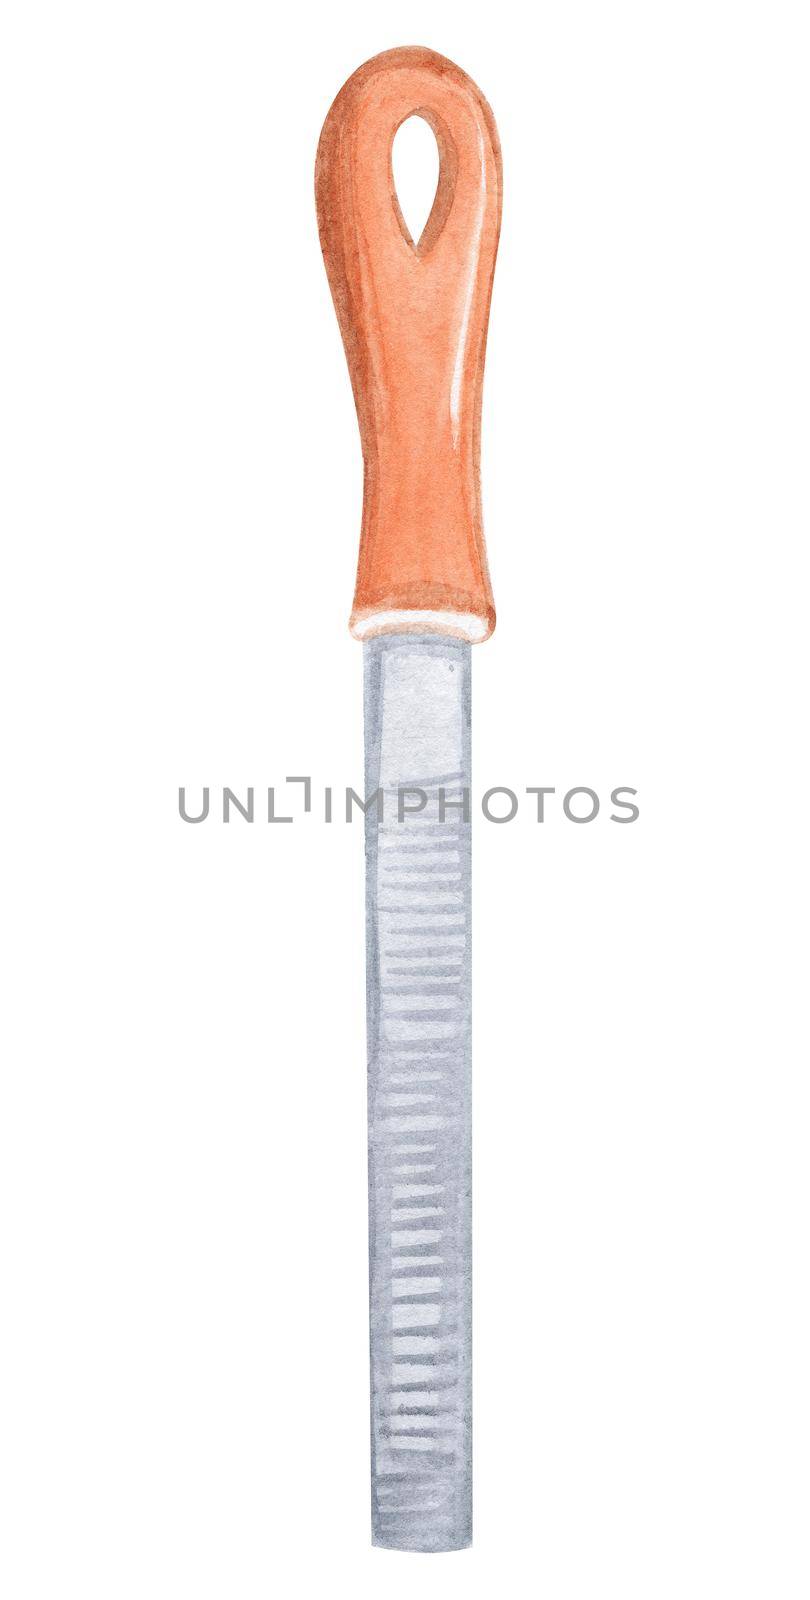 watercolor file instrument isolated on white background. hand drawn construction tool illustration